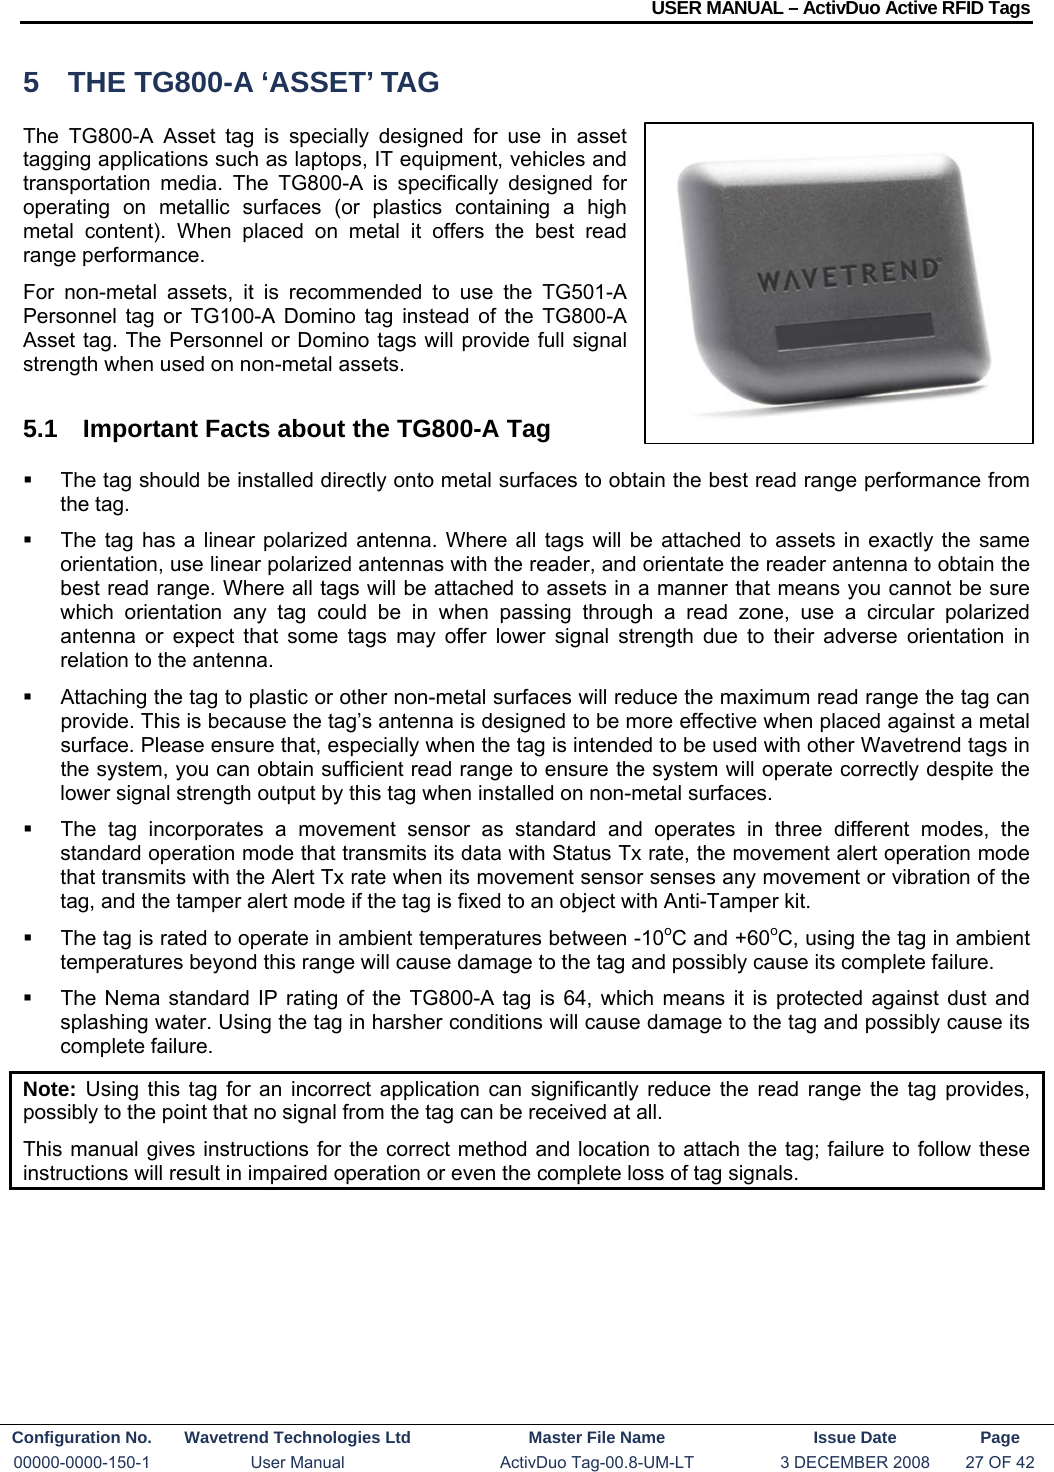 USER MANUAL – ActivDuo Active RFID Tags Configuration No.  Wavetrend Technologies Ltd  Master File Name   Issue Date  Page 00000-0000-150-1  User Manual  ActivDuo Tag-00.8-UM-LT  3 DECEMBER 2008  27 OF 42  5  THE TG800-A ‘ASSET’ TAG The TG800-A Asset tag is specially designed for use in asset tagging applications such as laptops, IT equipment, vehicles and transportation media. The TG800-A is specifically designed for operating on metallic surfaces (or plastics containing a high metal content). When placed on metal it offers the best read range performance. For non-metal assets, it is recommended to use the TG501-A Personnel tag or TG100-A Domino tag instead of the TG800-A Asset tag. The Personnel or Domino tags will provide full signal strength when used on non-metal assets.  5.1  Important Facts about the TG800-A Tag   The tag should be installed directly onto metal surfaces to obtain the best read range performance from the tag.    The tag has a linear polarized antenna. Where all tags will be attached to assets in exactly the same orientation, use linear polarized antennas with the reader, and orientate the reader antenna to obtain the best read range. Where all tags will be attached to assets in a manner that means you cannot be sure which orientation any tag could be in when passing through a read zone, use a circular polarized antenna or expect that some tags may offer lower signal strength due to their adverse orientation in relation to the antenna.   Attaching the tag to plastic or other non-metal surfaces will reduce the maximum read range the tag can provide. This is because the tag’s antenna is designed to be more effective when placed against a metal surface. Please ensure that, especially when the tag is intended to be used with other Wavetrend tags in the system, you can obtain sufficient read range to ensure the system will operate correctly despite the lower signal strength output by this tag when installed on non-metal surfaces.   The tag incorporates a movement sensor as standard and operates in three different modes, the standard operation mode that transmits its data with Status Tx rate, the movement alert operation mode that transmits with the Alert Tx rate when its movement sensor senses any movement or vibration of the tag, and the tamper alert mode if the tag is fixed to an object with Anti-Tamper kit.   The tag is rated to operate in ambient temperatures between -10oC and +60oC, using the tag in ambient temperatures beyond this range will cause damage to the tag and possibly cause its complete failure.   The Nema standard IP rating of the TG800-A tag is 64, which means it is protected against dust and splashing water. Using the tag in harsher conditions will cause damage to the tag and possibly cause its complete failure. Note:  Using this tag for an incorrect application can significantly reduce the read range the tag provides, possibly to the point that no signal from the tag can be received at all. This manual gives instructions for the correct method and location to attach the tag; failure to follow these instructions will result in impaired operation or even the complete loss of tag signals.    